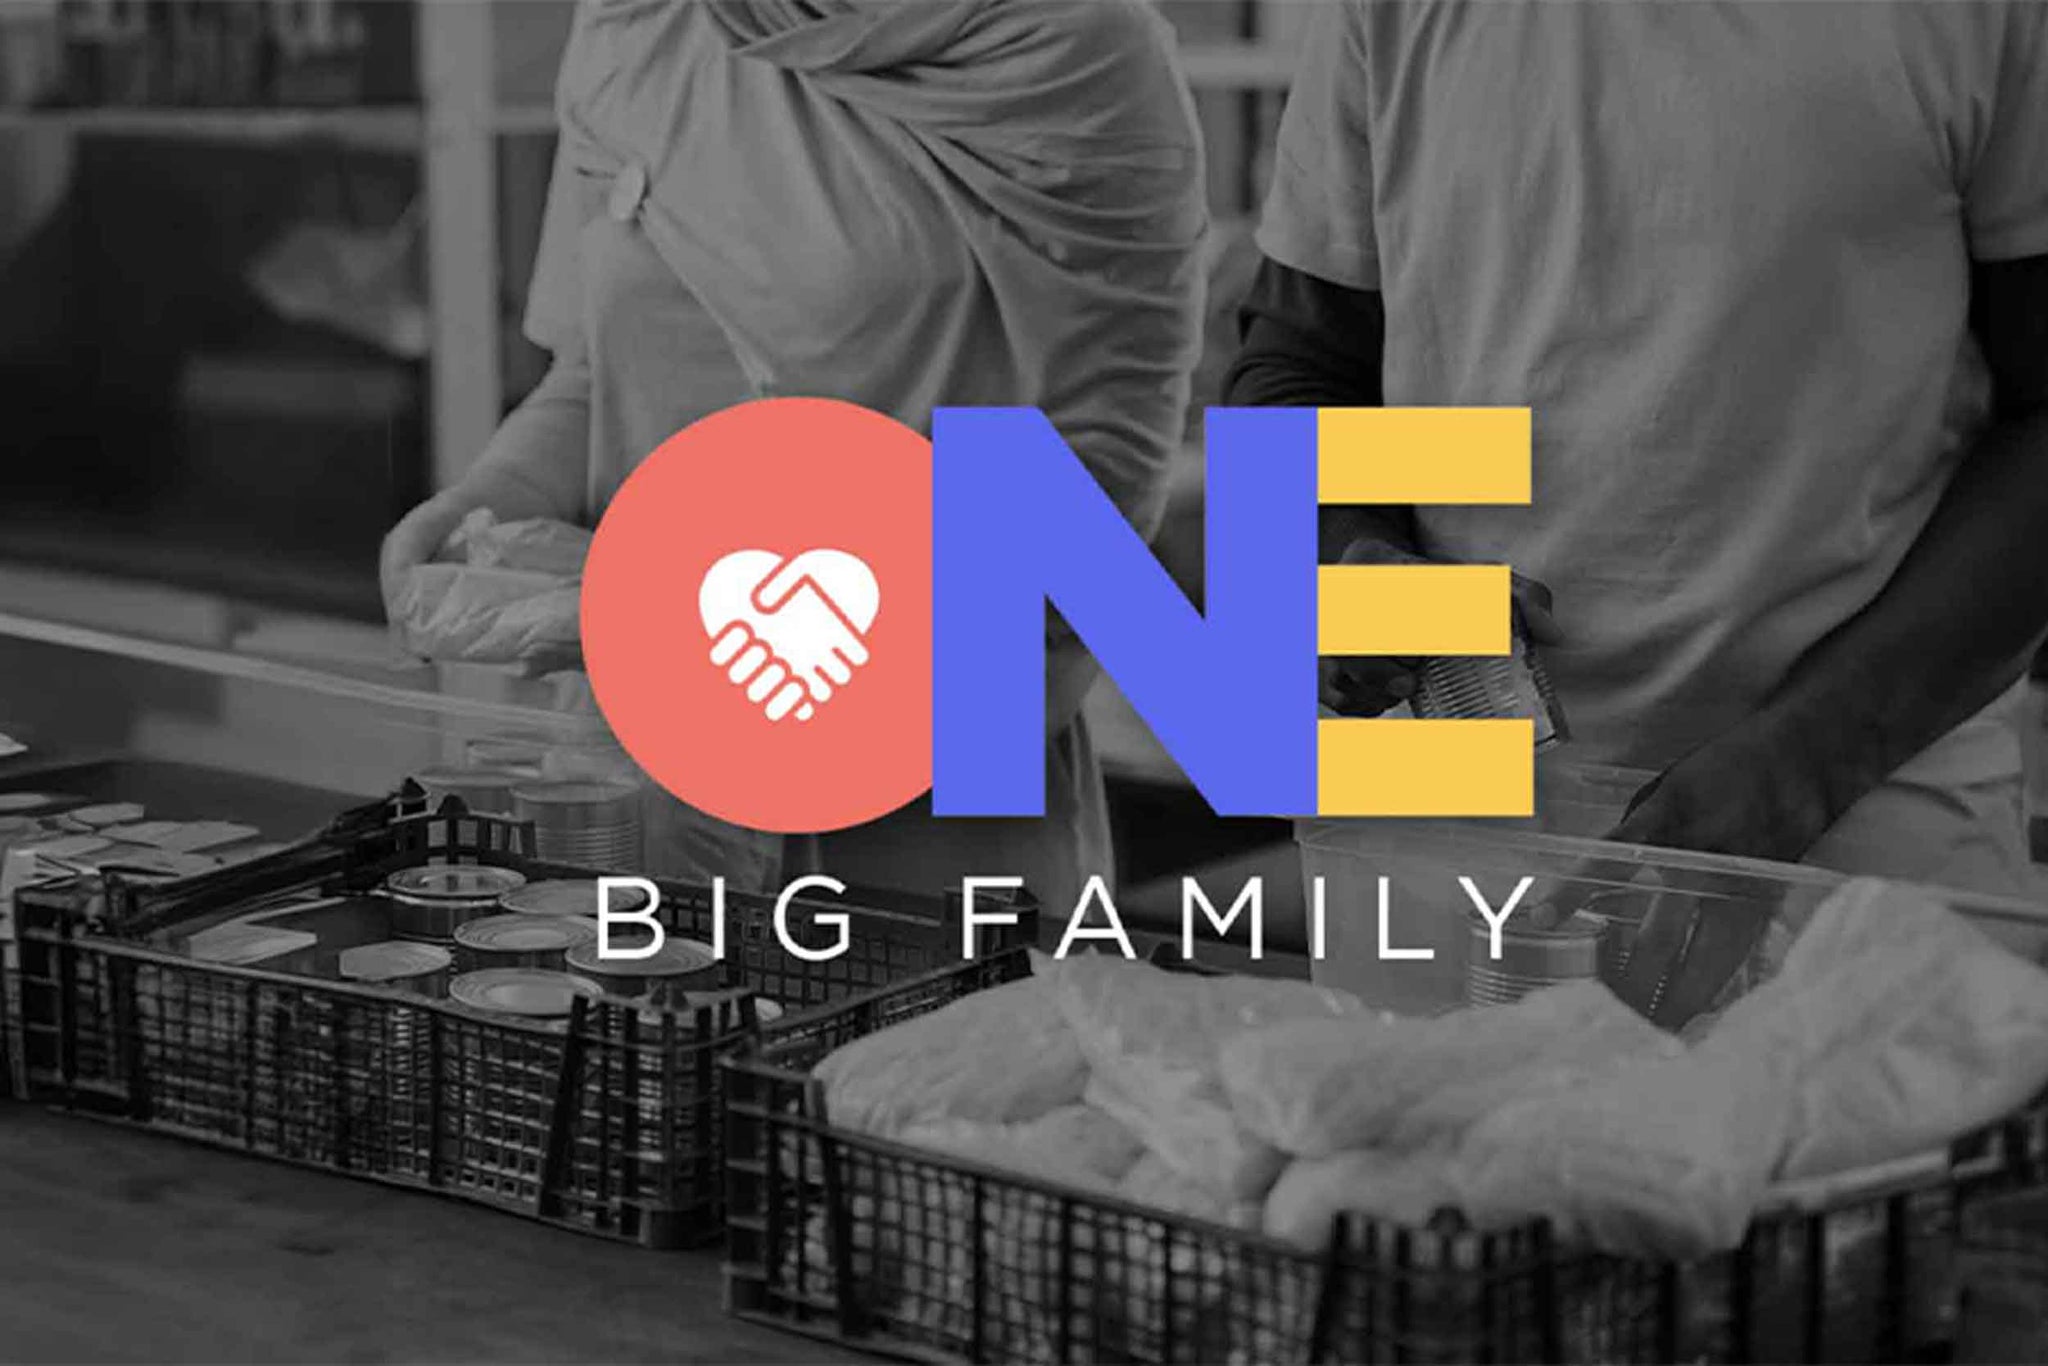 Introducing: One Big Family